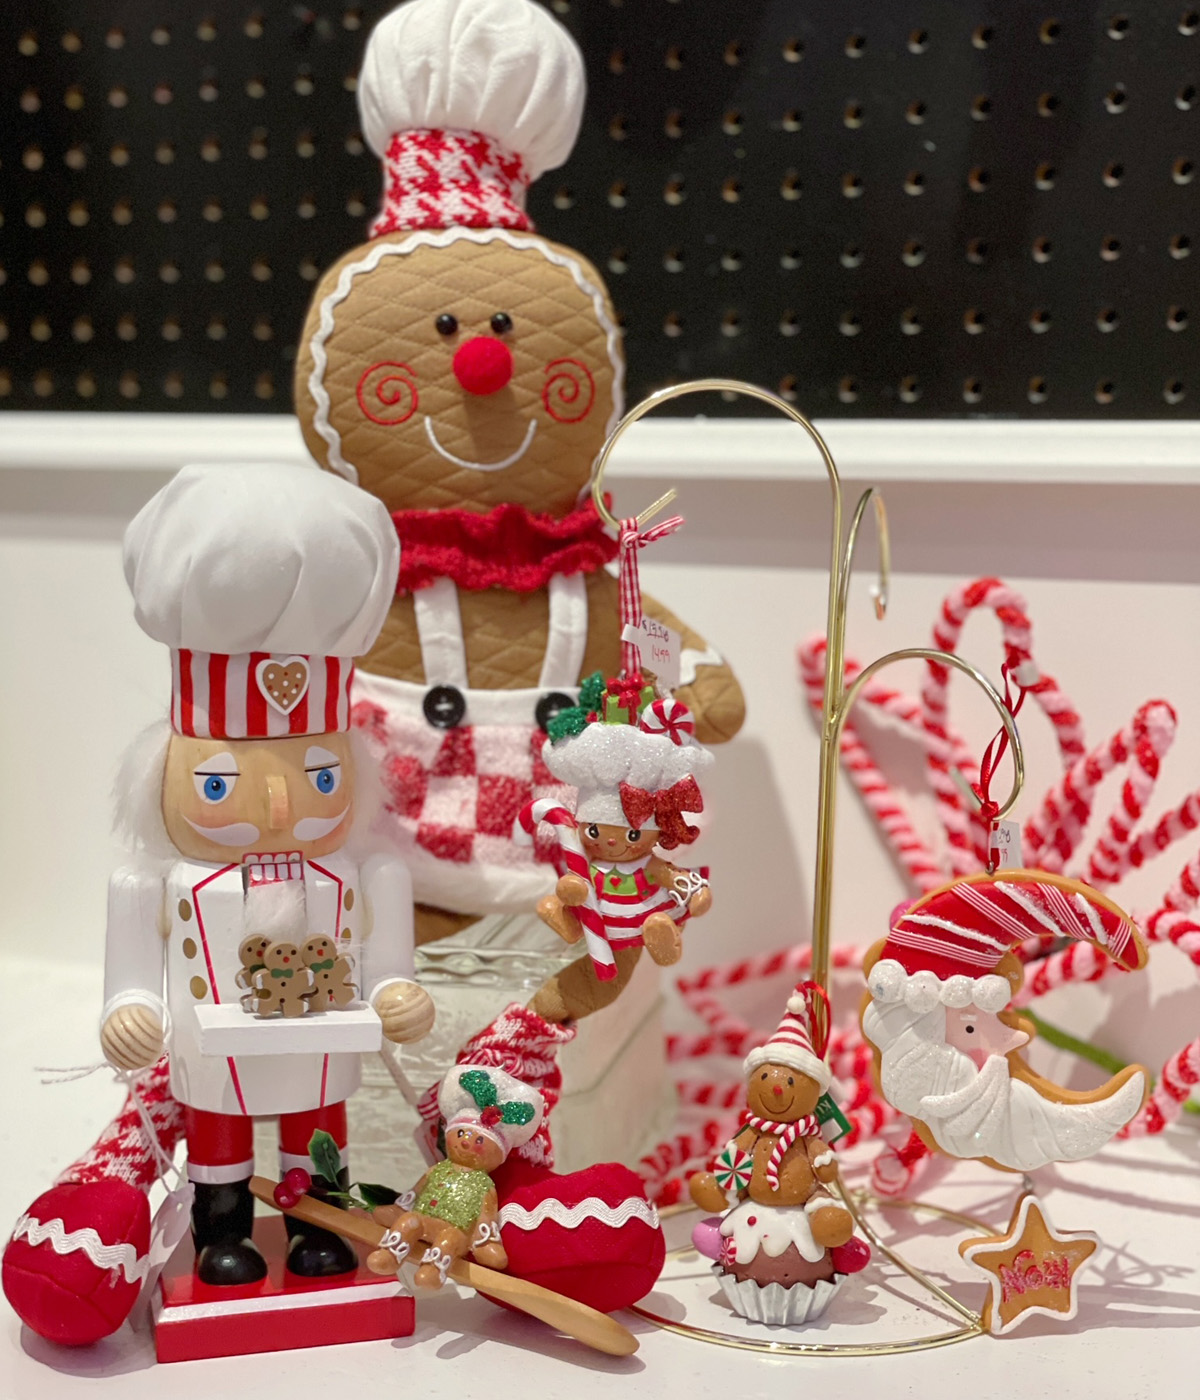 Gingerbread figurines and candycanes